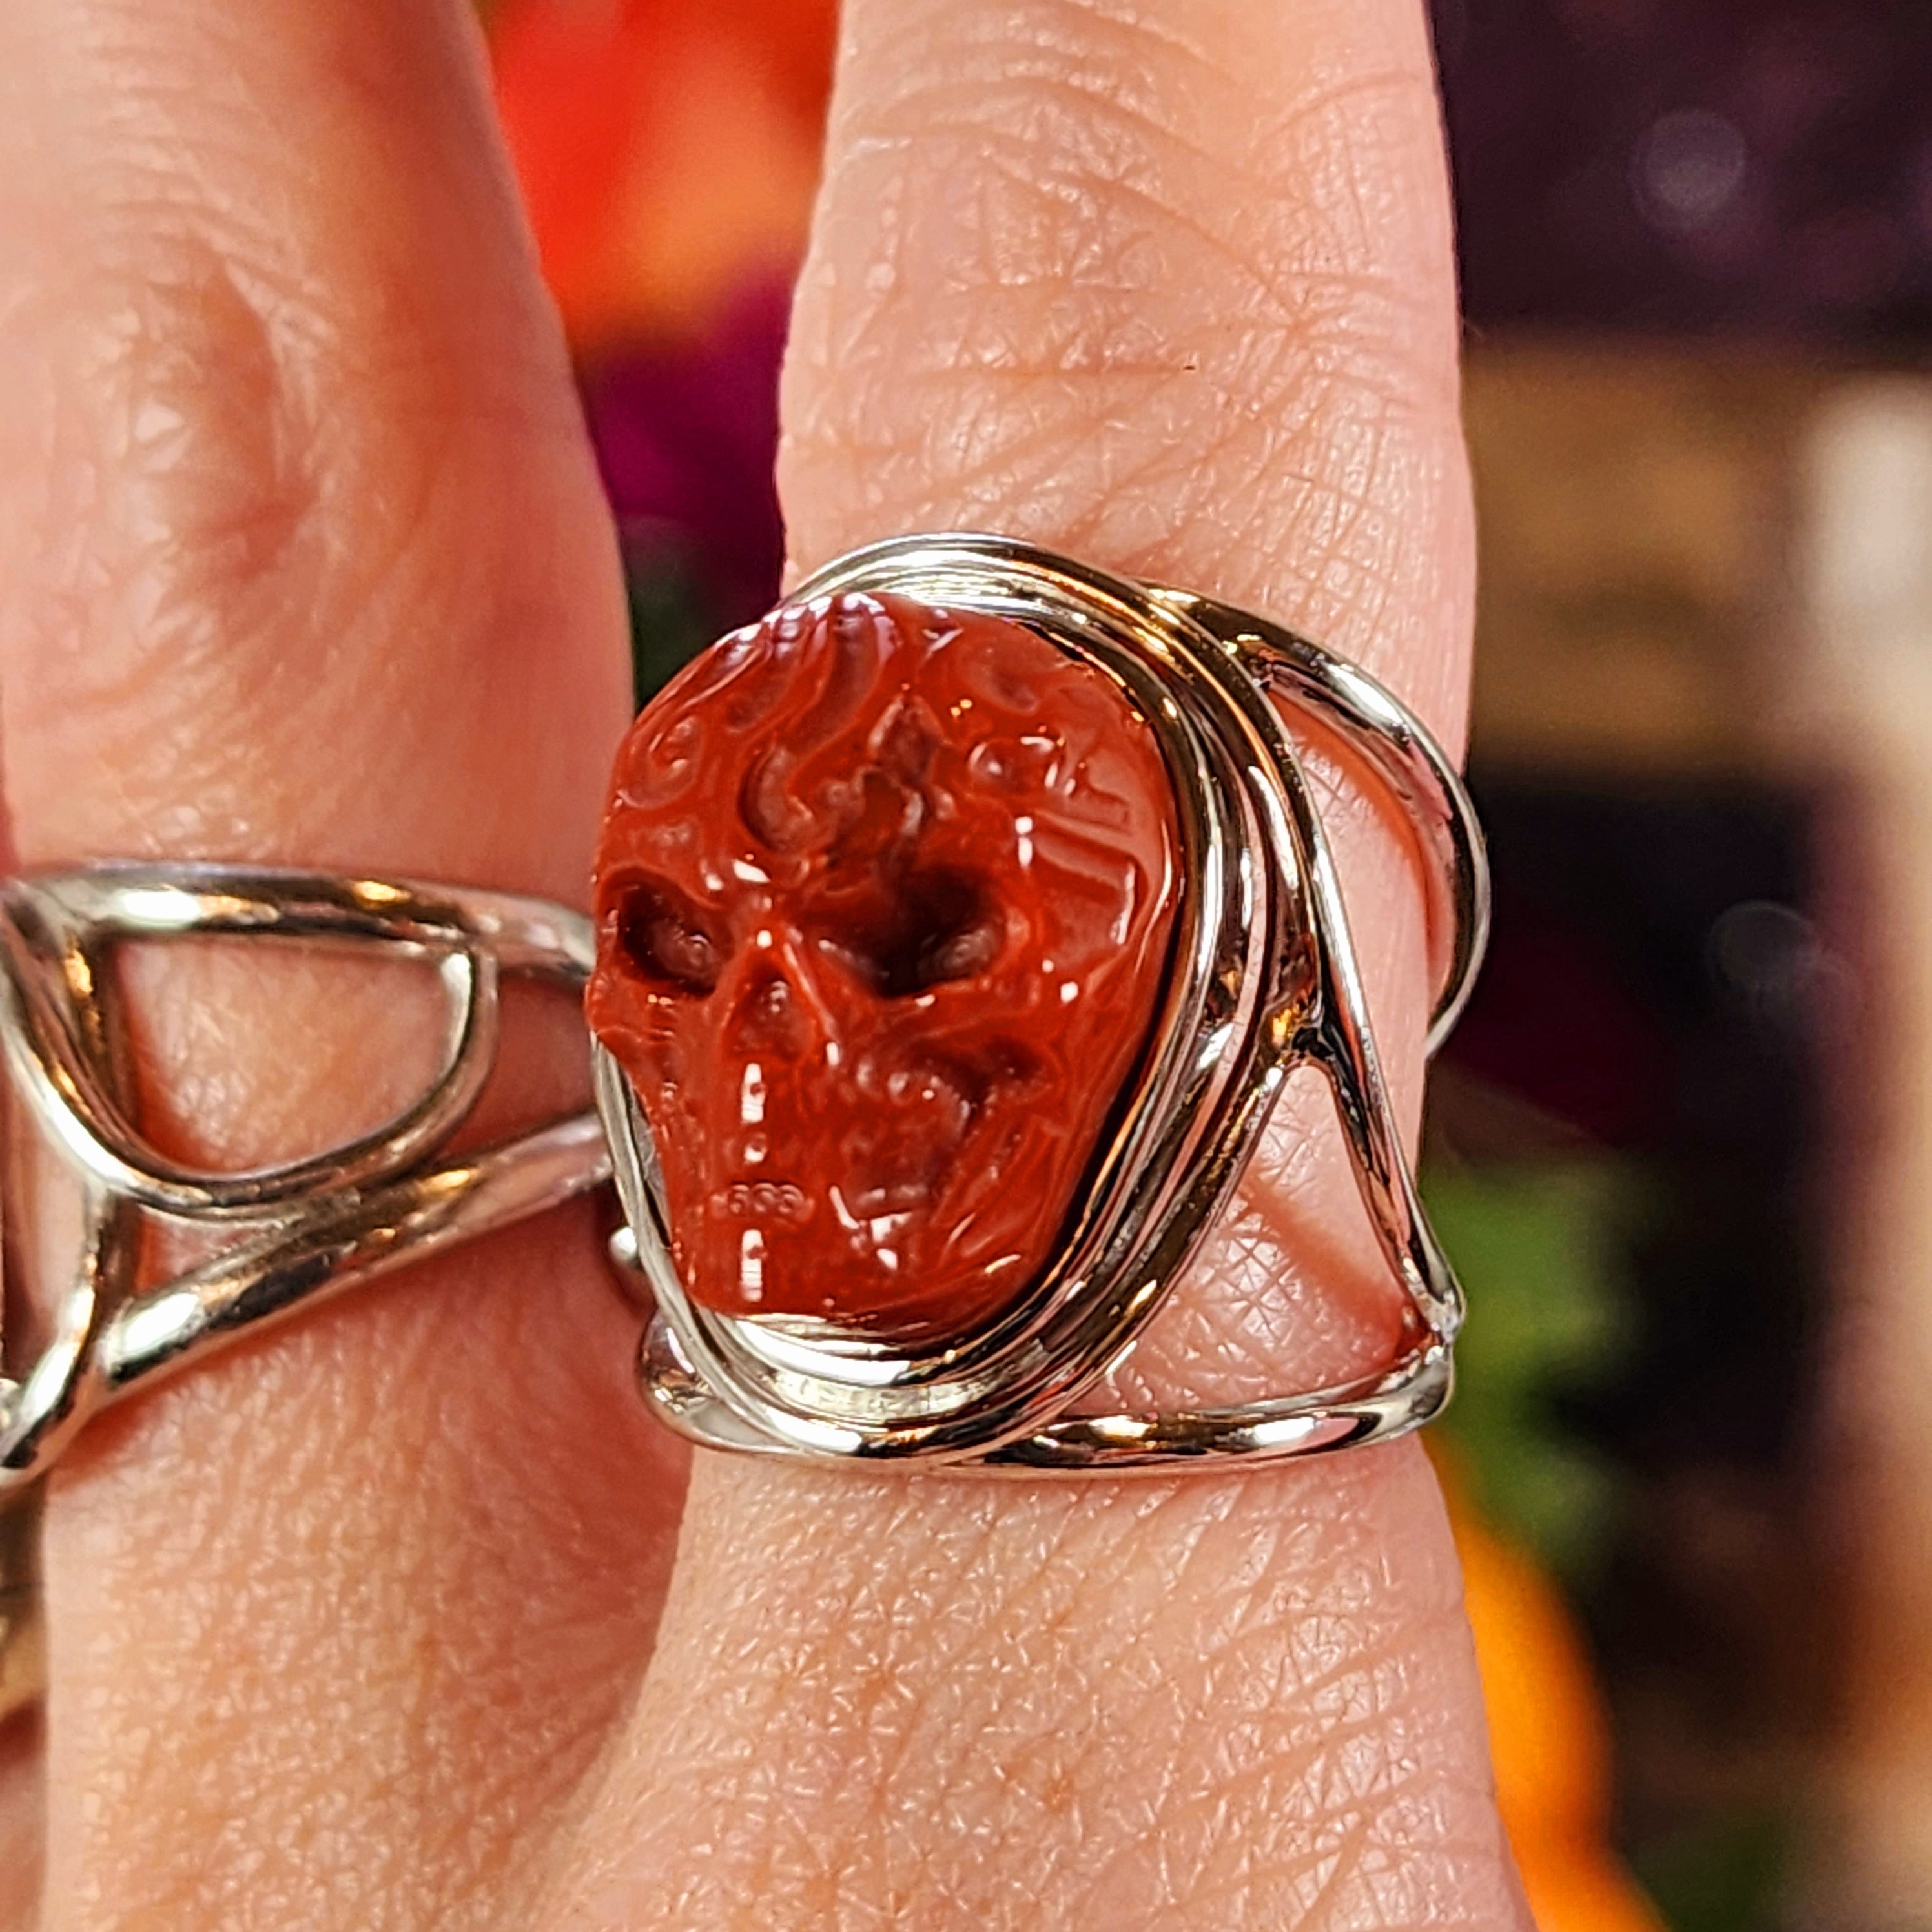 Carnelian Skull Finger Cuff Adjustable Ring .925 Silver for Personal Power